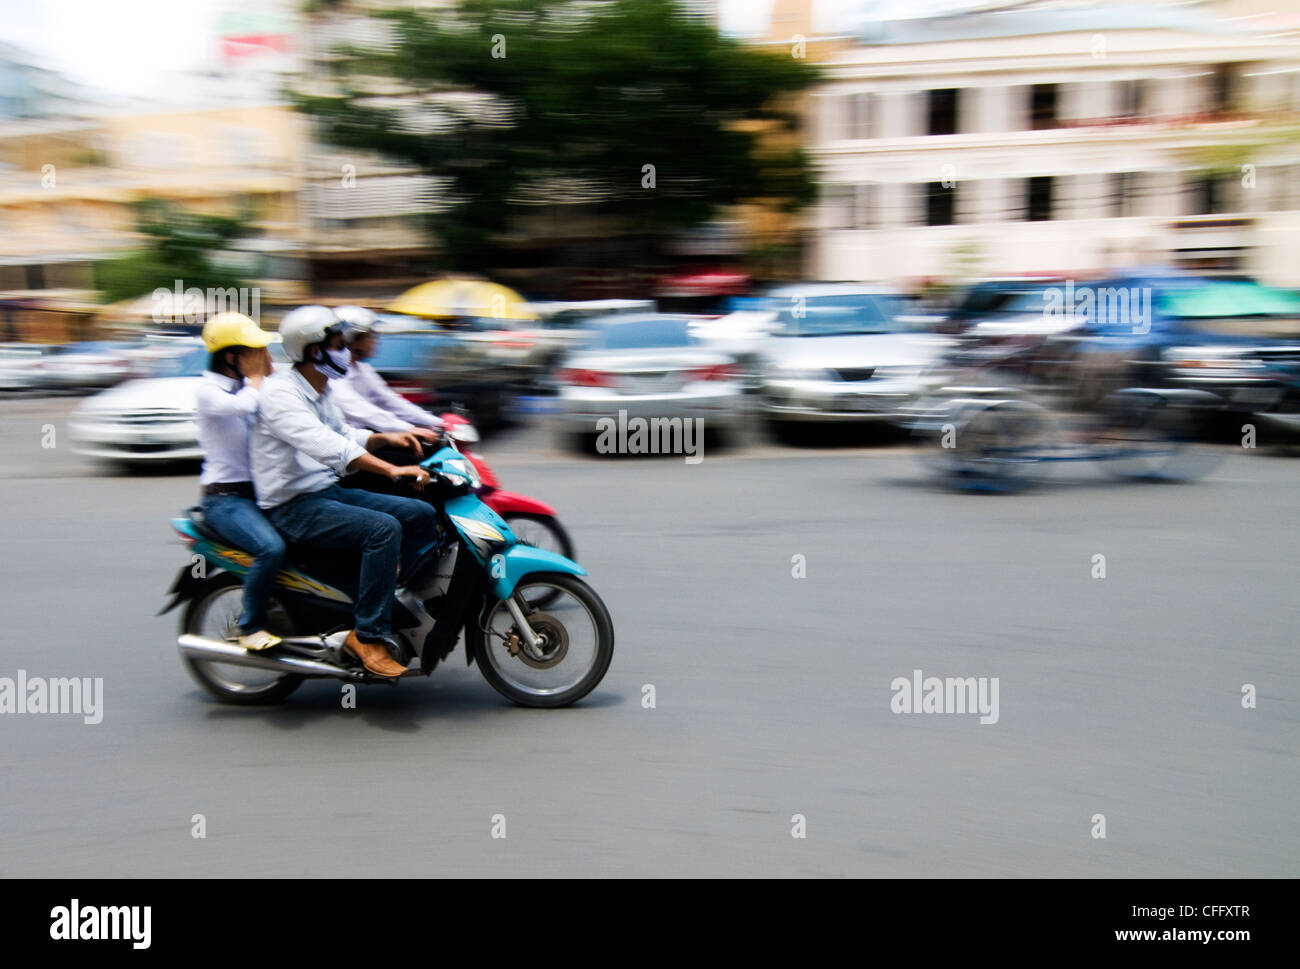 Rushing home on their motorcycle. Stock Photo